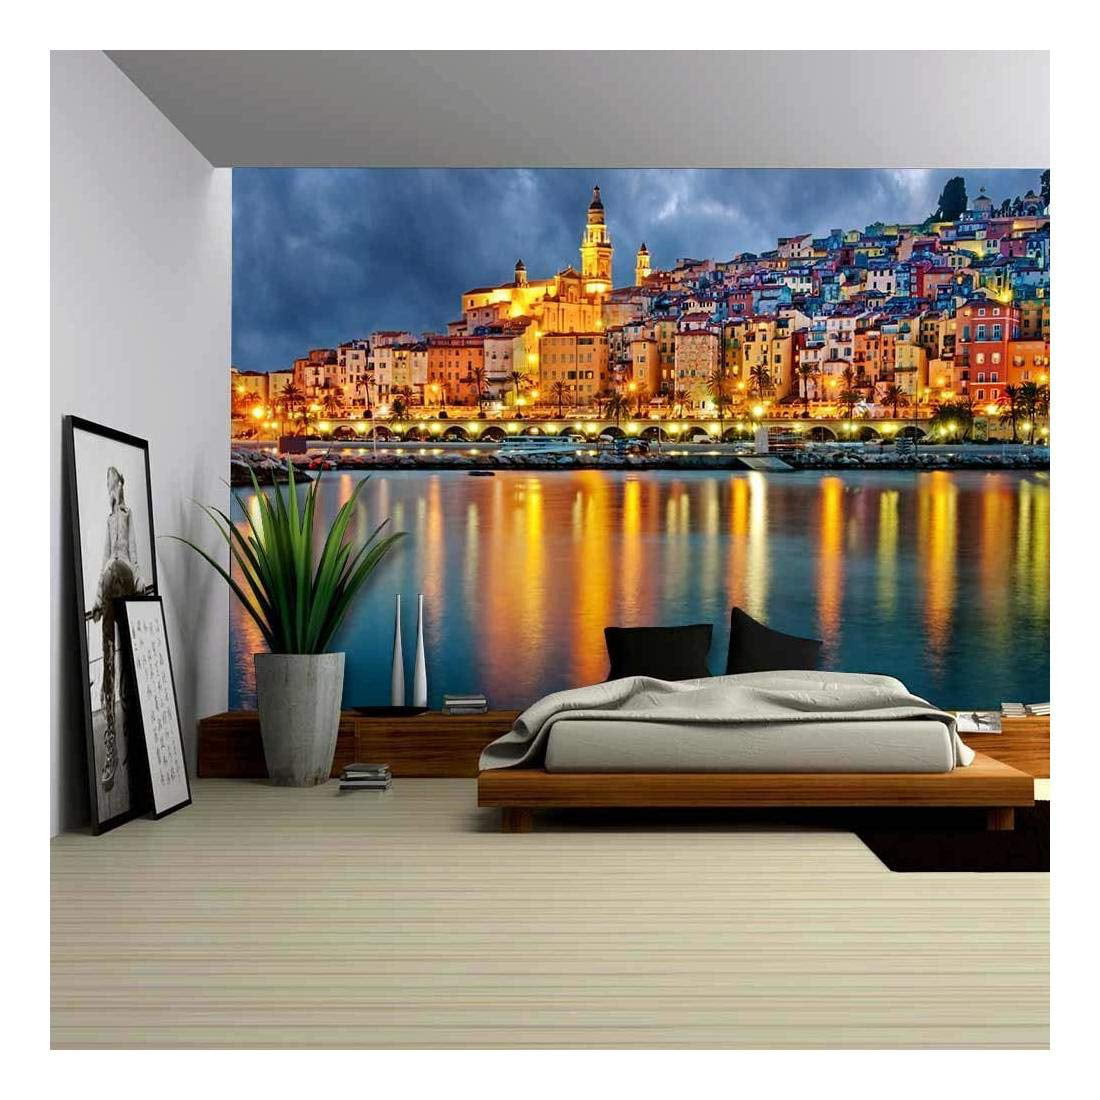 wall26 Provence Village Menton After Sunset 66x96 inches Self-Adhesive Large Wallpaper Removable Wall Mural